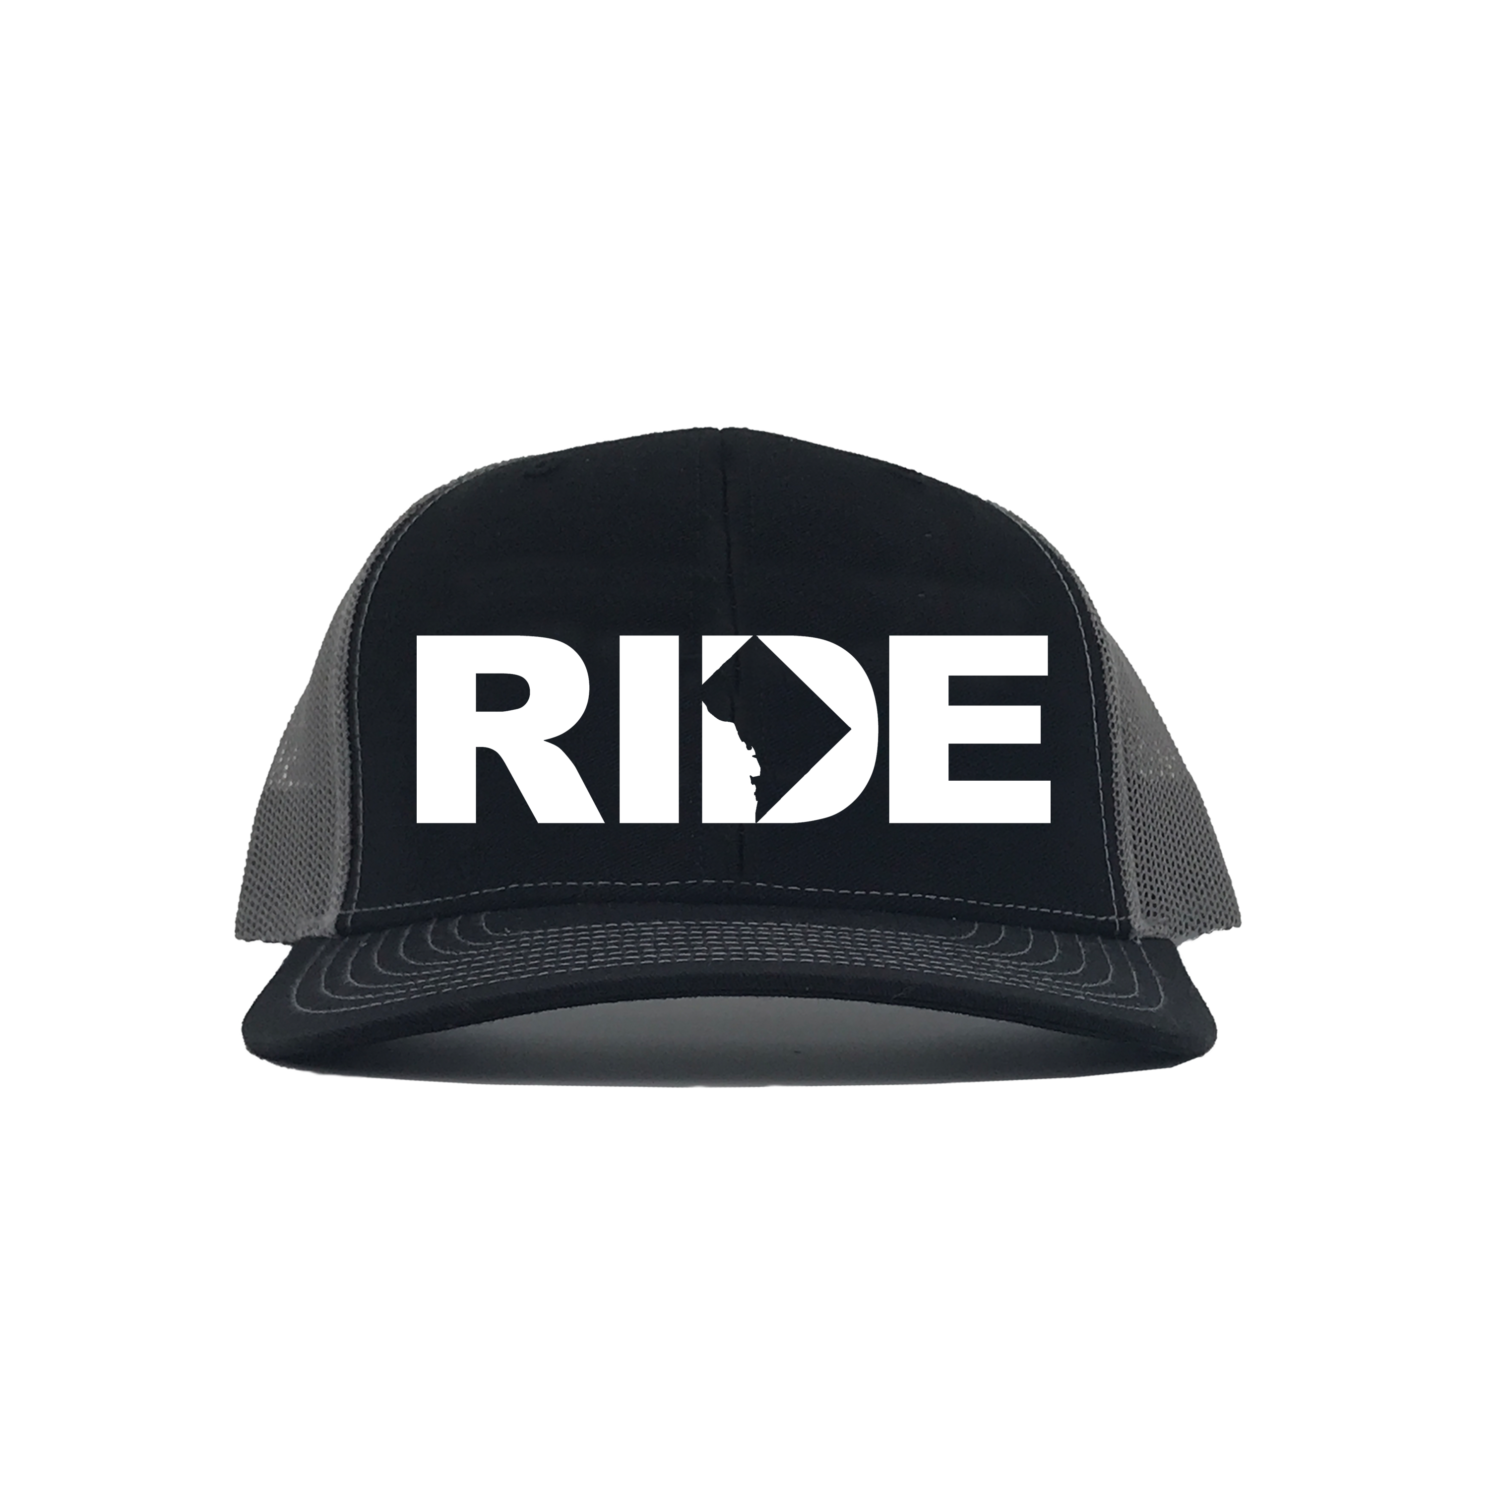 Ride District of Columbia Classic Embroidered Snapback Trucker Hat Black/Charcoal